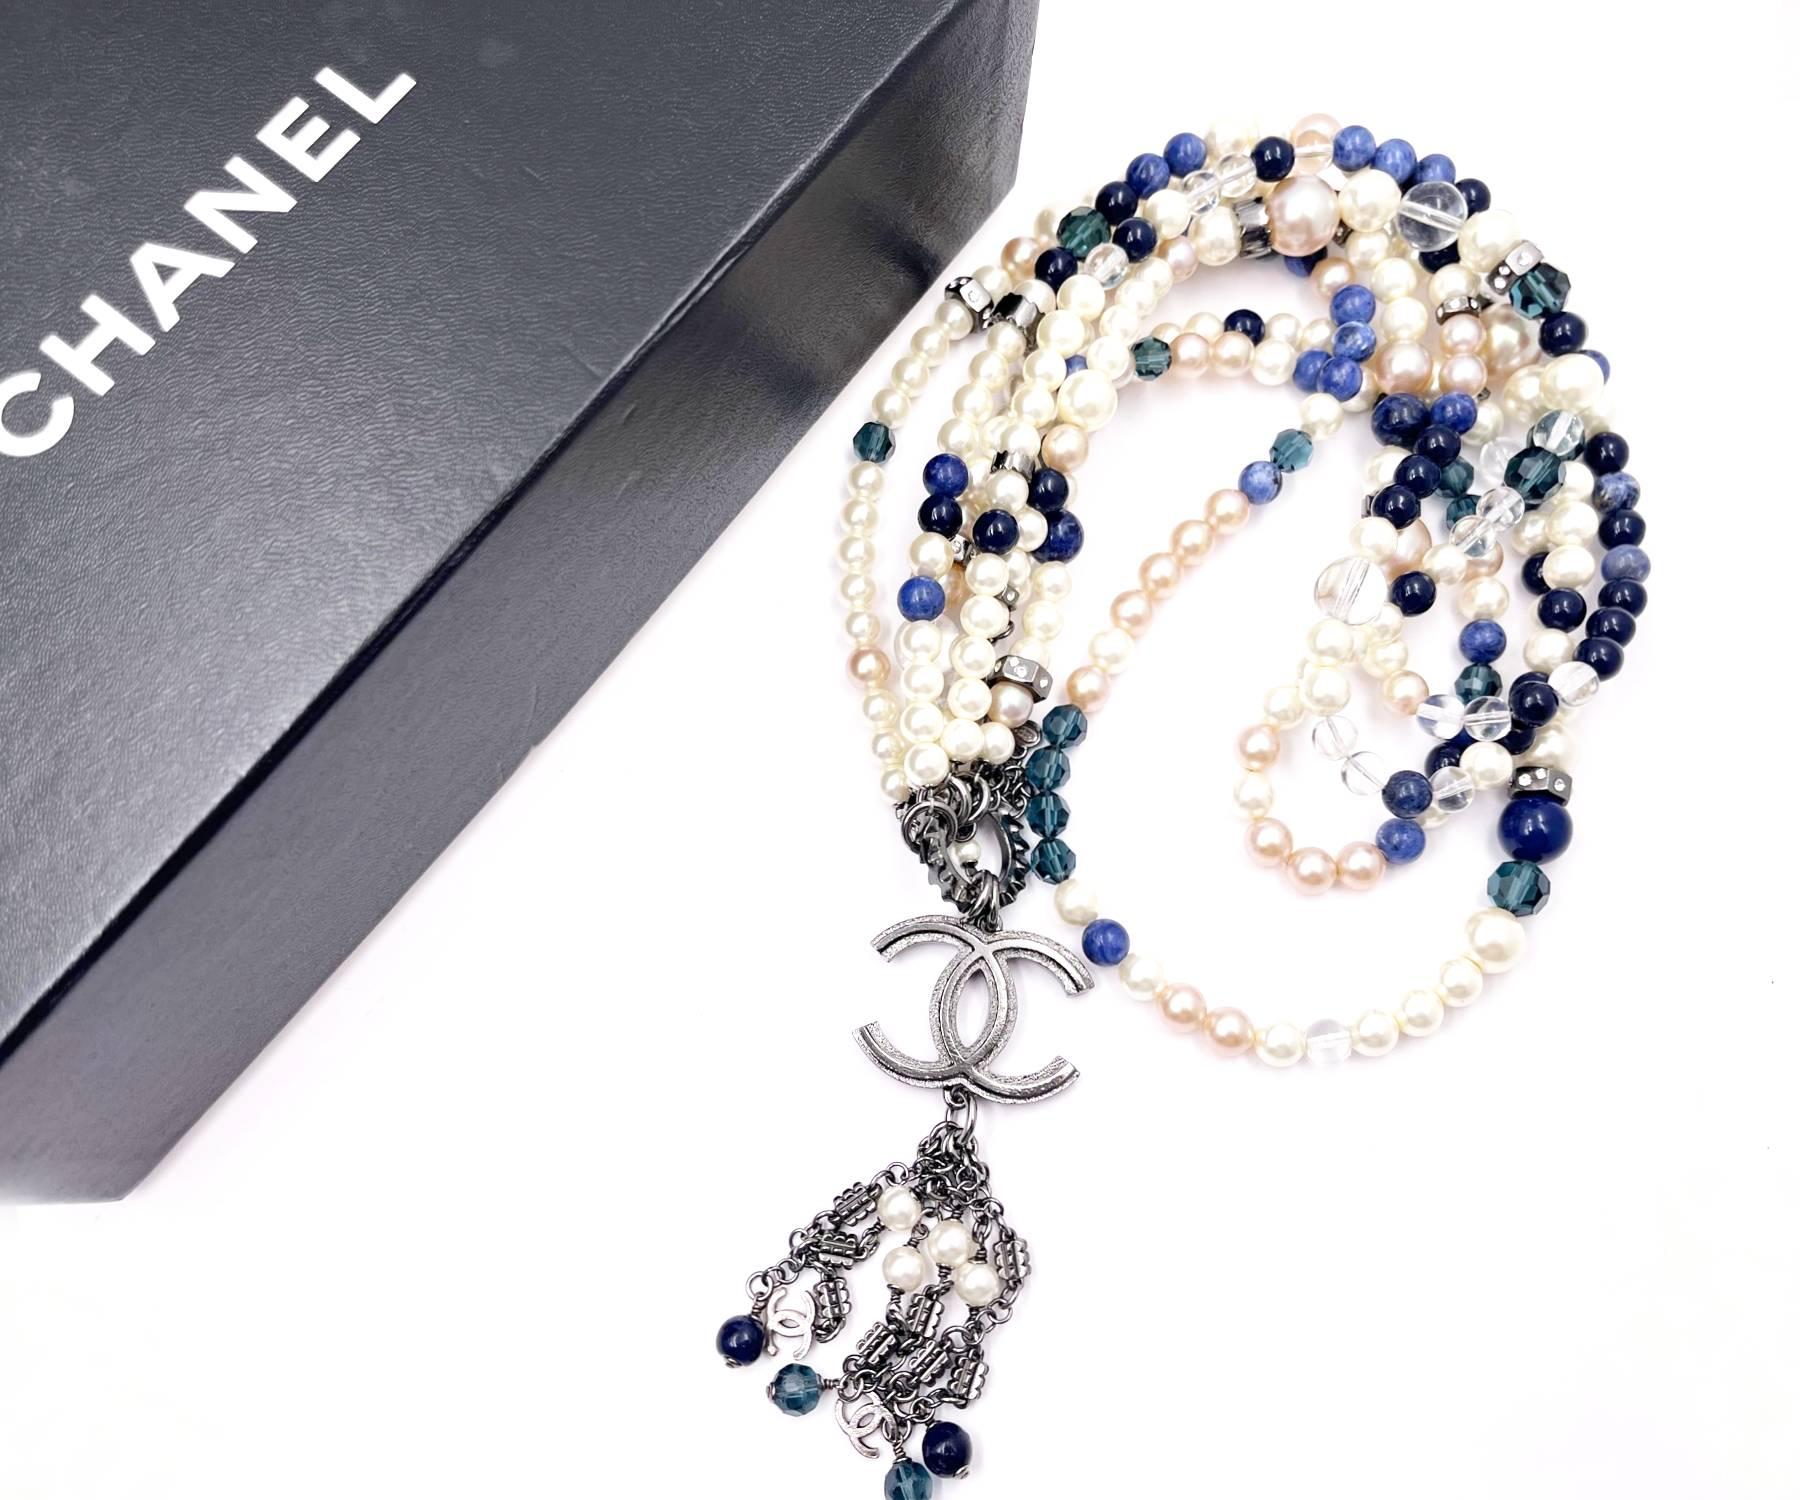 Chanel Super Rare Blue Stone Pearl Gunmetal CC Tassel Large Pendant Super Long Necklace

*Marked 04
*Made in France
*Comes with the original box

-The pendant is approximately 1.5″ x 5″ .
-Chain is approximately total 46″ long .
-It is super rare.